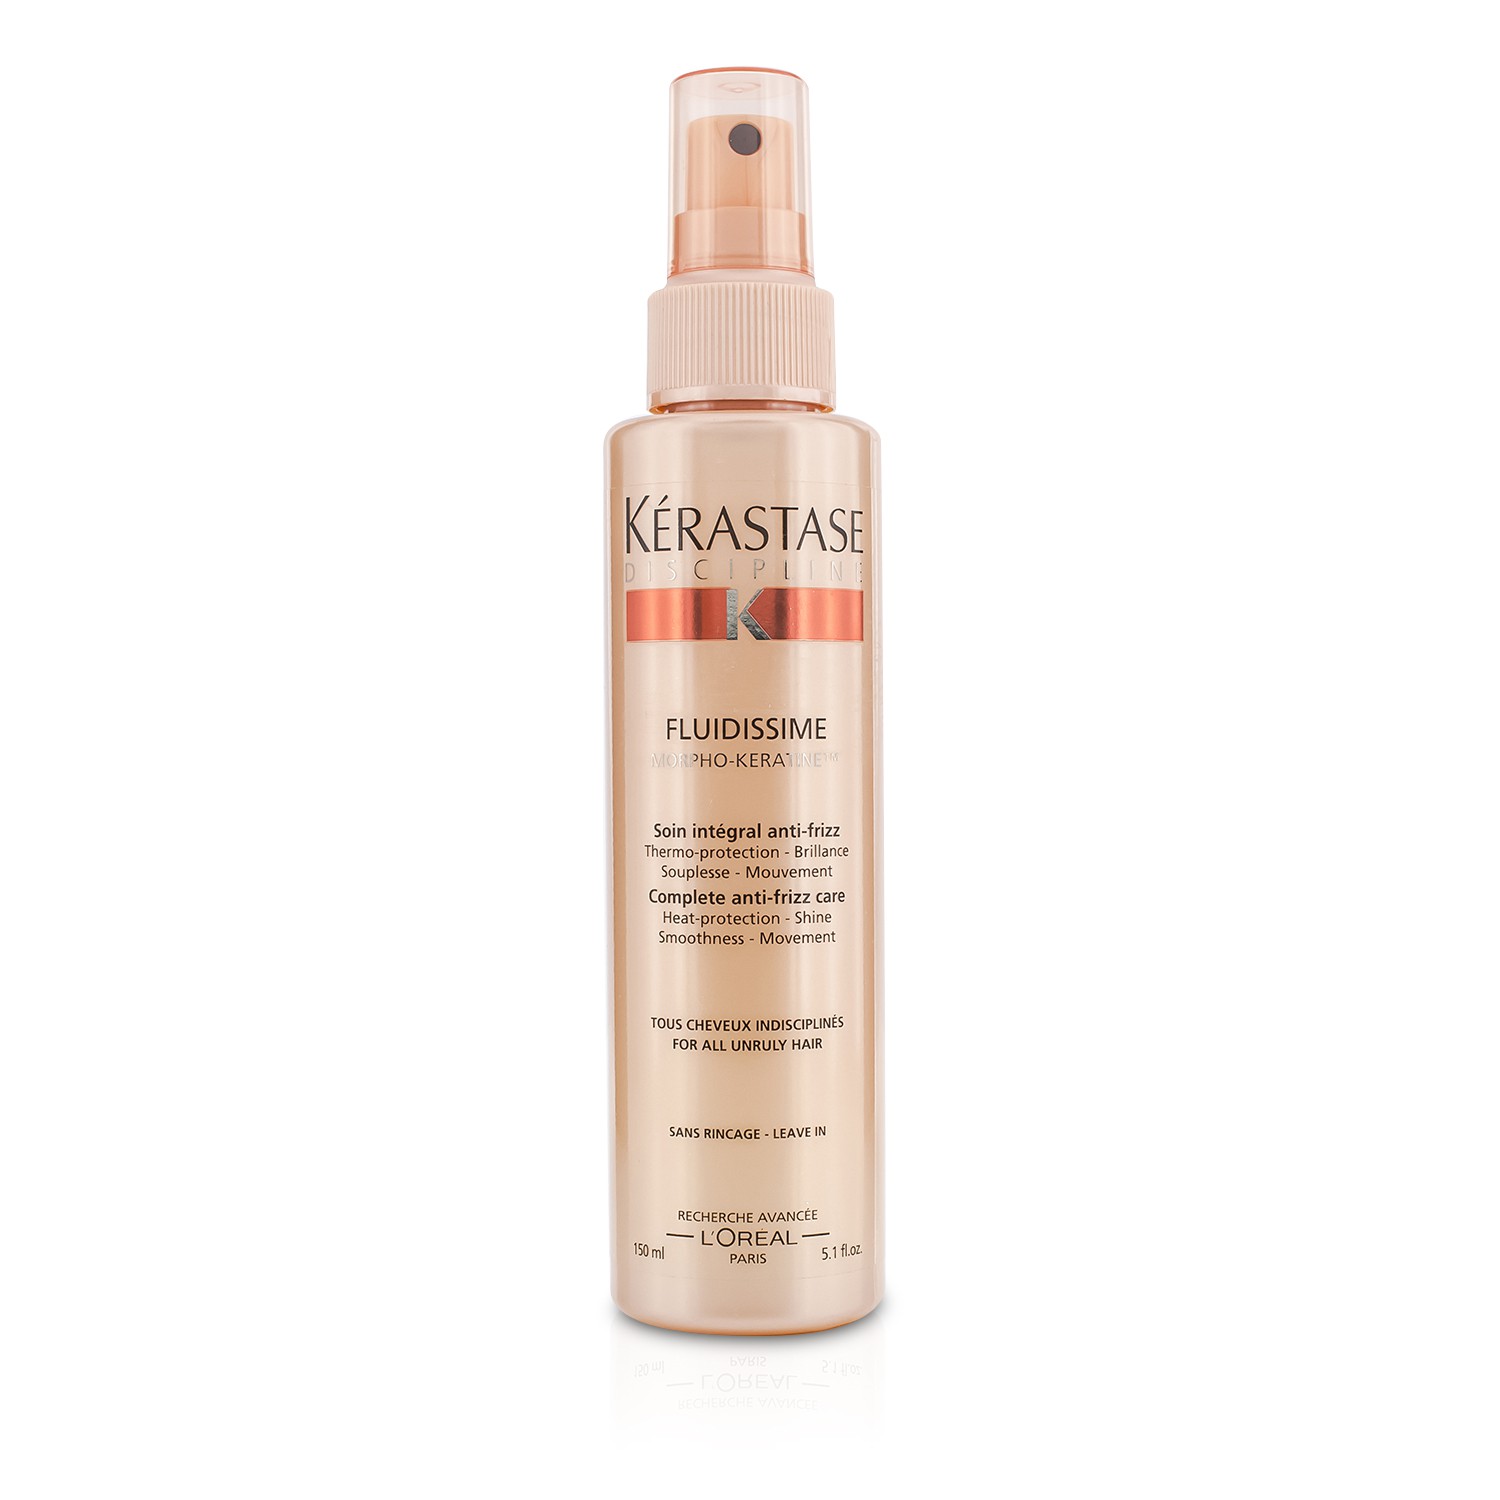 Discipline Fluidissime Complete Anti-Frizz Care (For All Unruly Hair) Kerastase Image